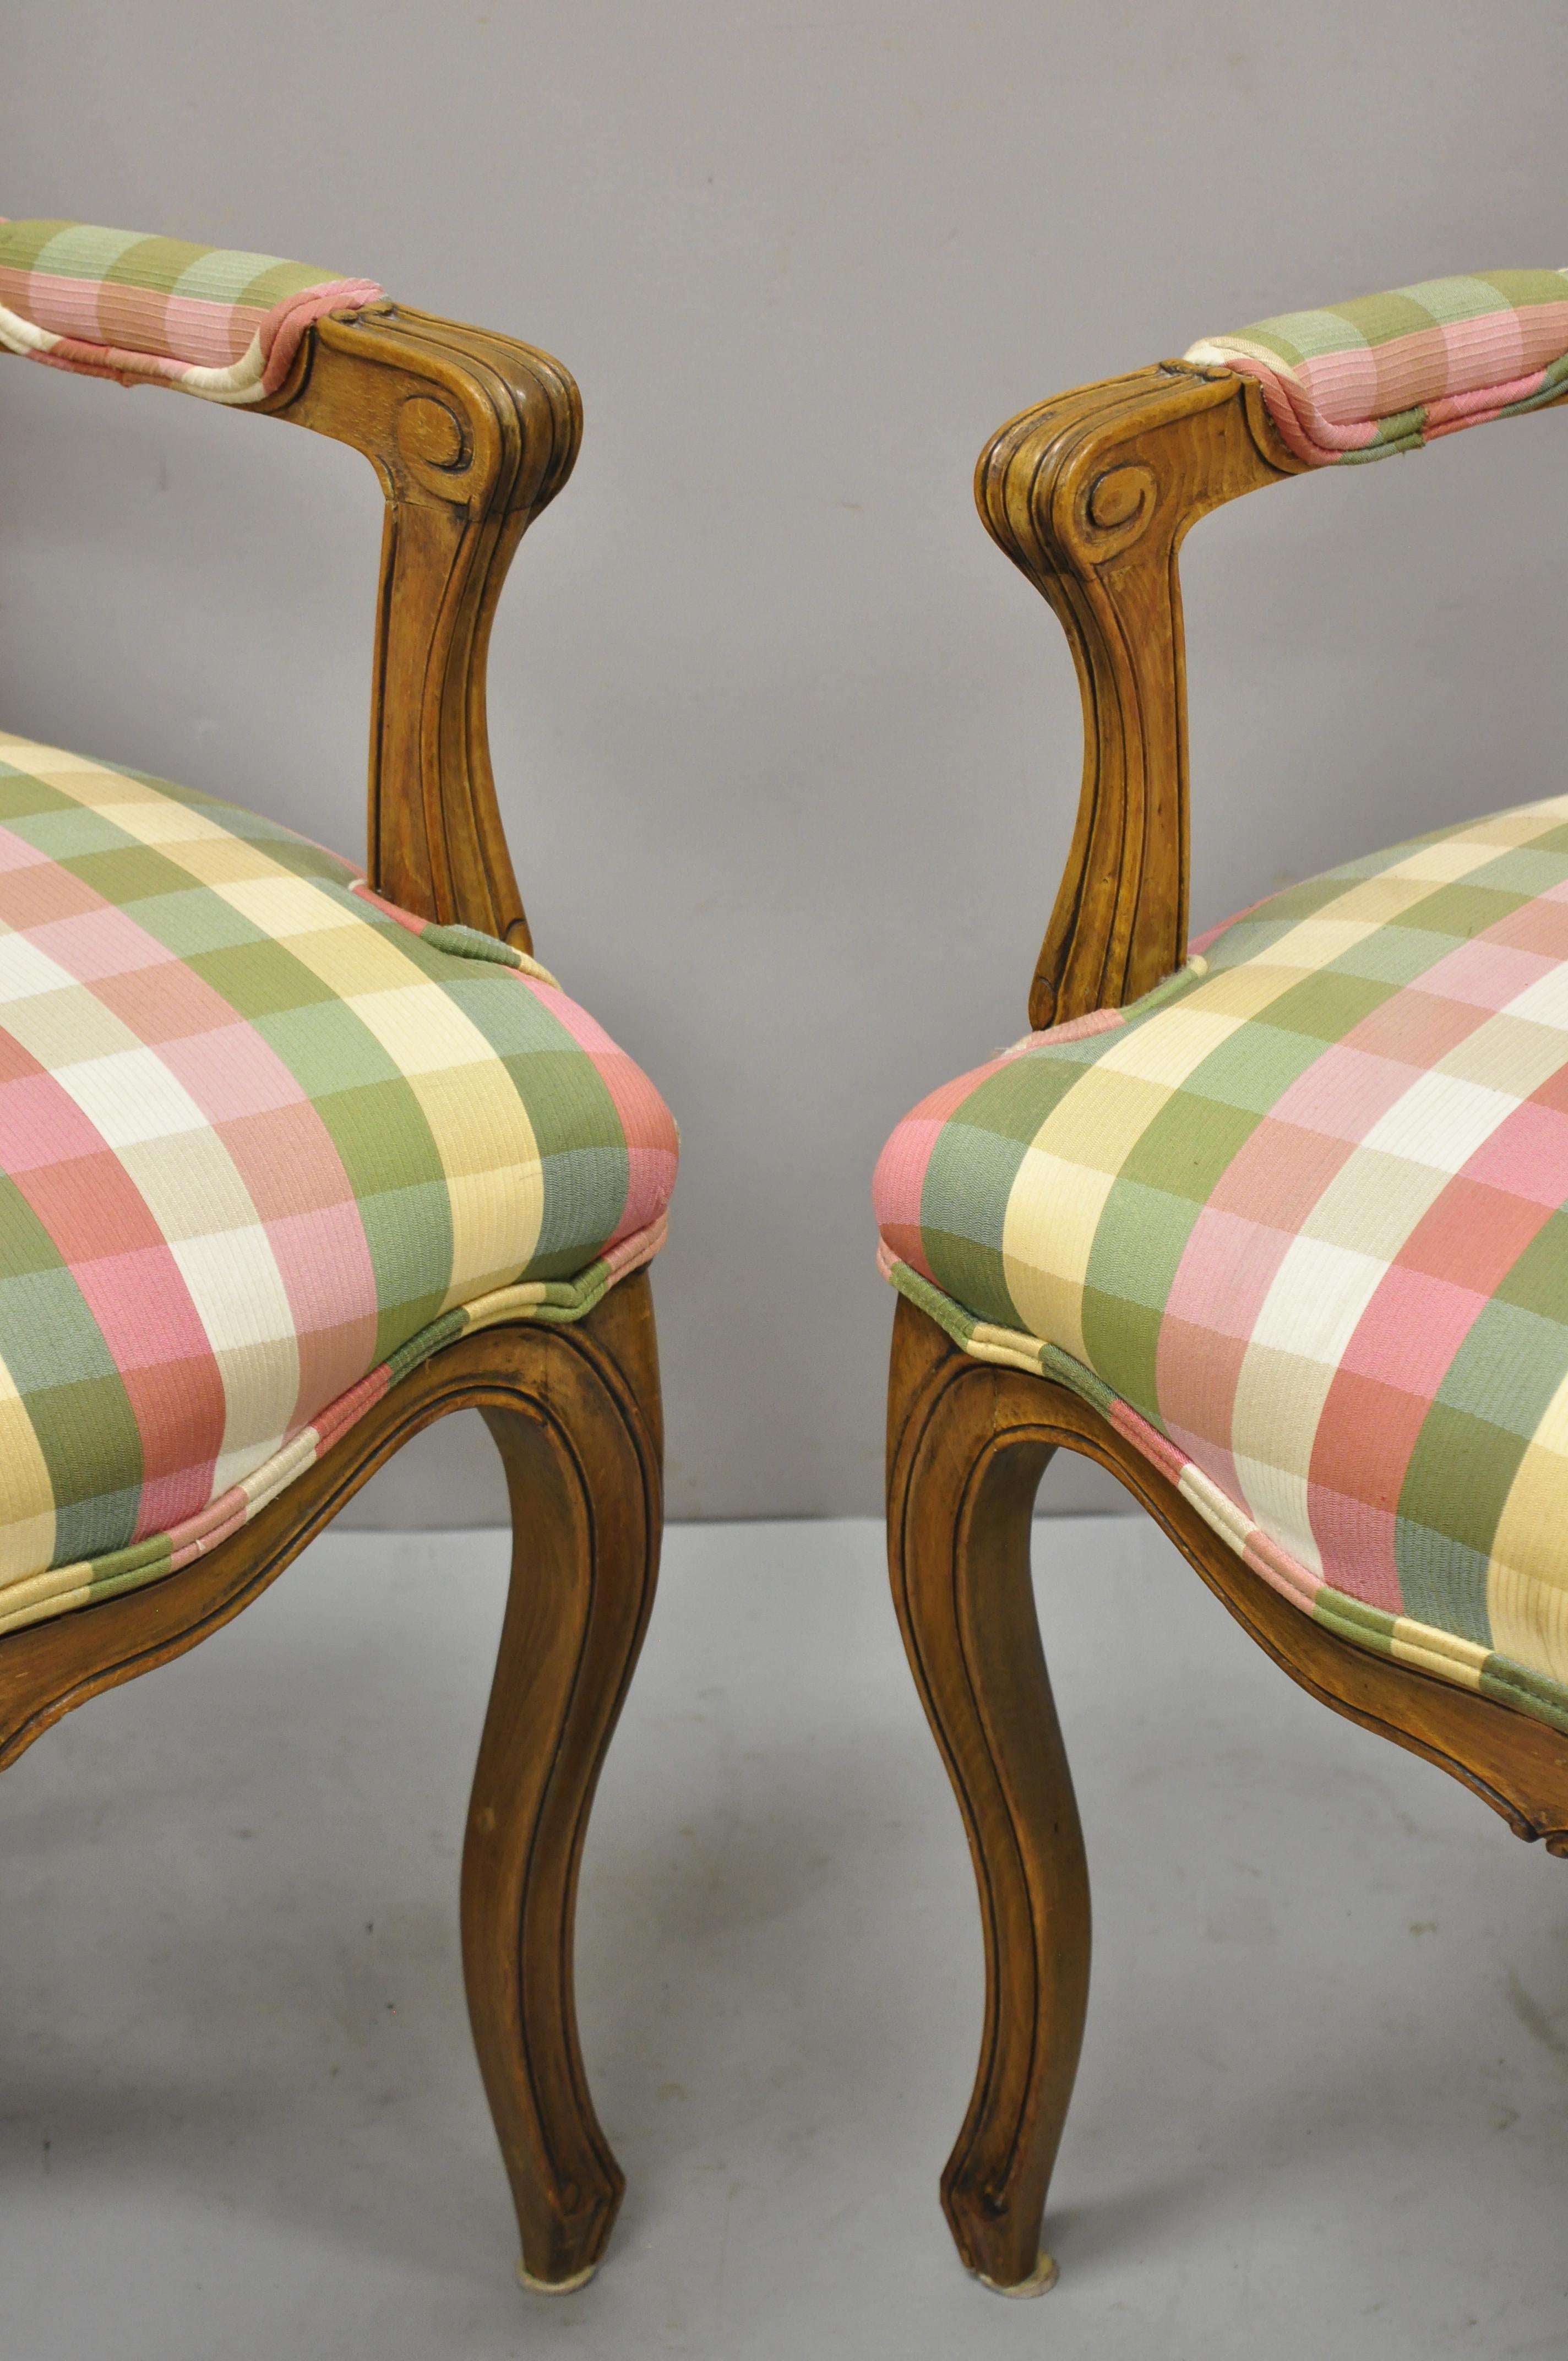 Spanish Vintage French Provincial Fauteuil Arm Chairs by Simon Loscertales Bona, a Pair For Sale